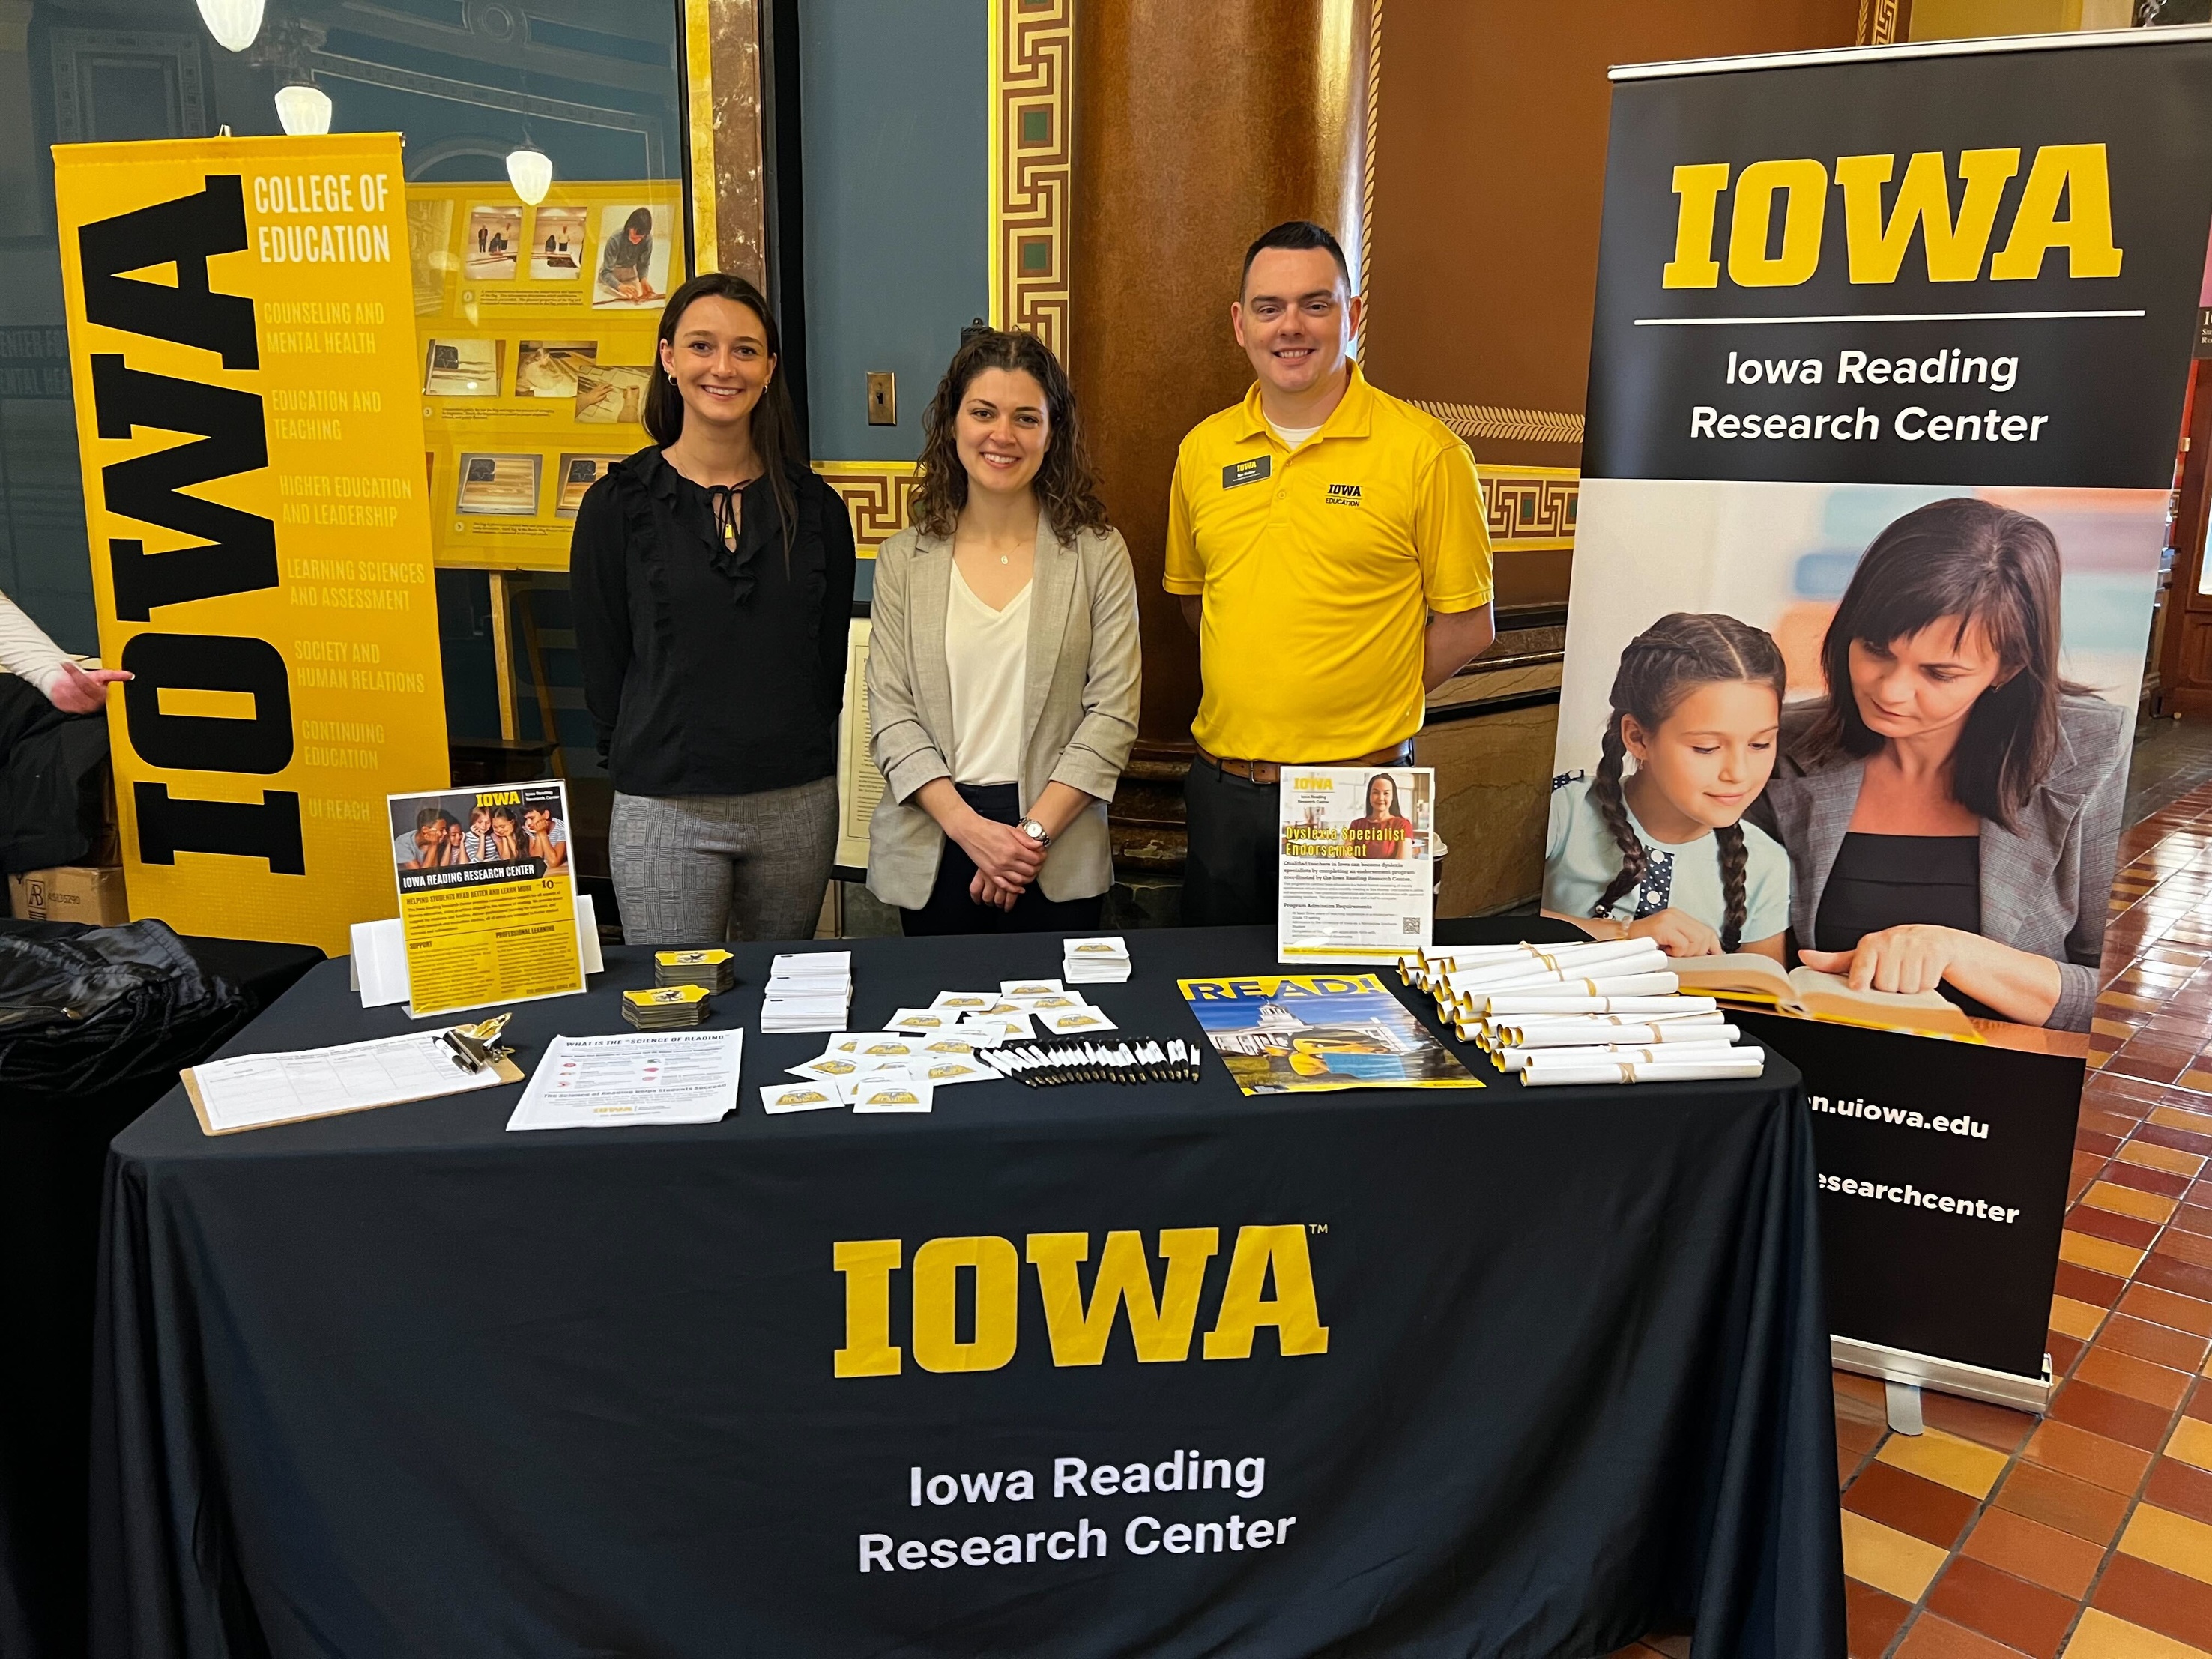 IRRC staff at a booth at the Iowa Capital Building